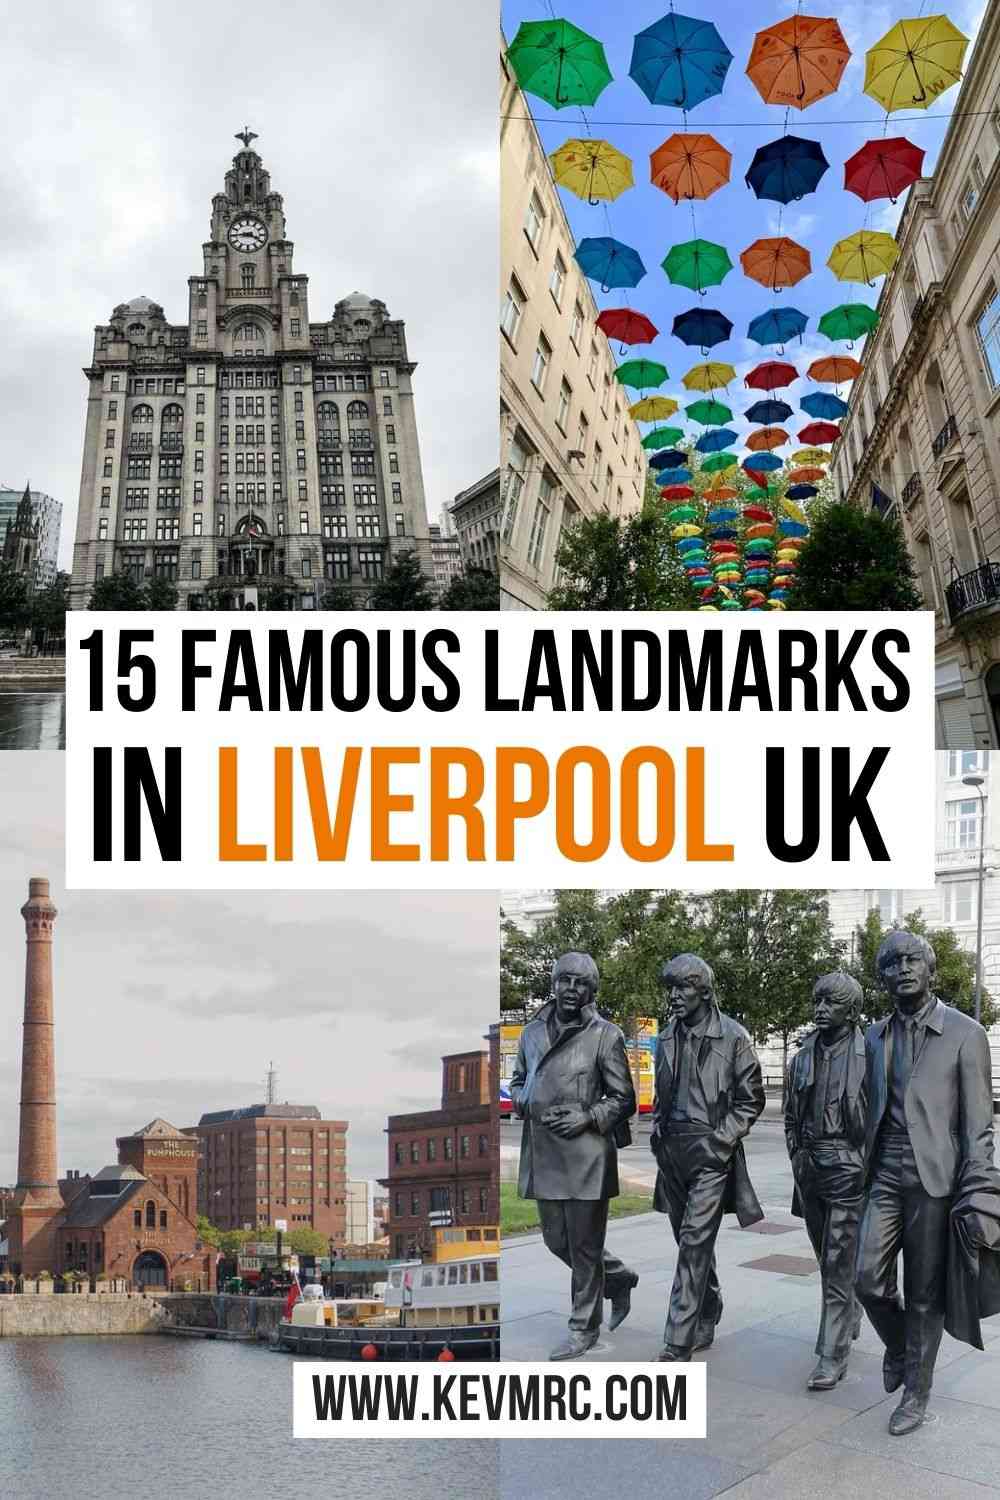 Liverpool is a major port city in England and is best known around the world as the hometown of the Beatles and the Liverpool FC. But Liverpool is much more than that: the 3rd largest city of the UK is full of beautiful museums, architectural gems and lively streets. Here are the 15 famous landmarks in Liverpool, England. #england #liverpool